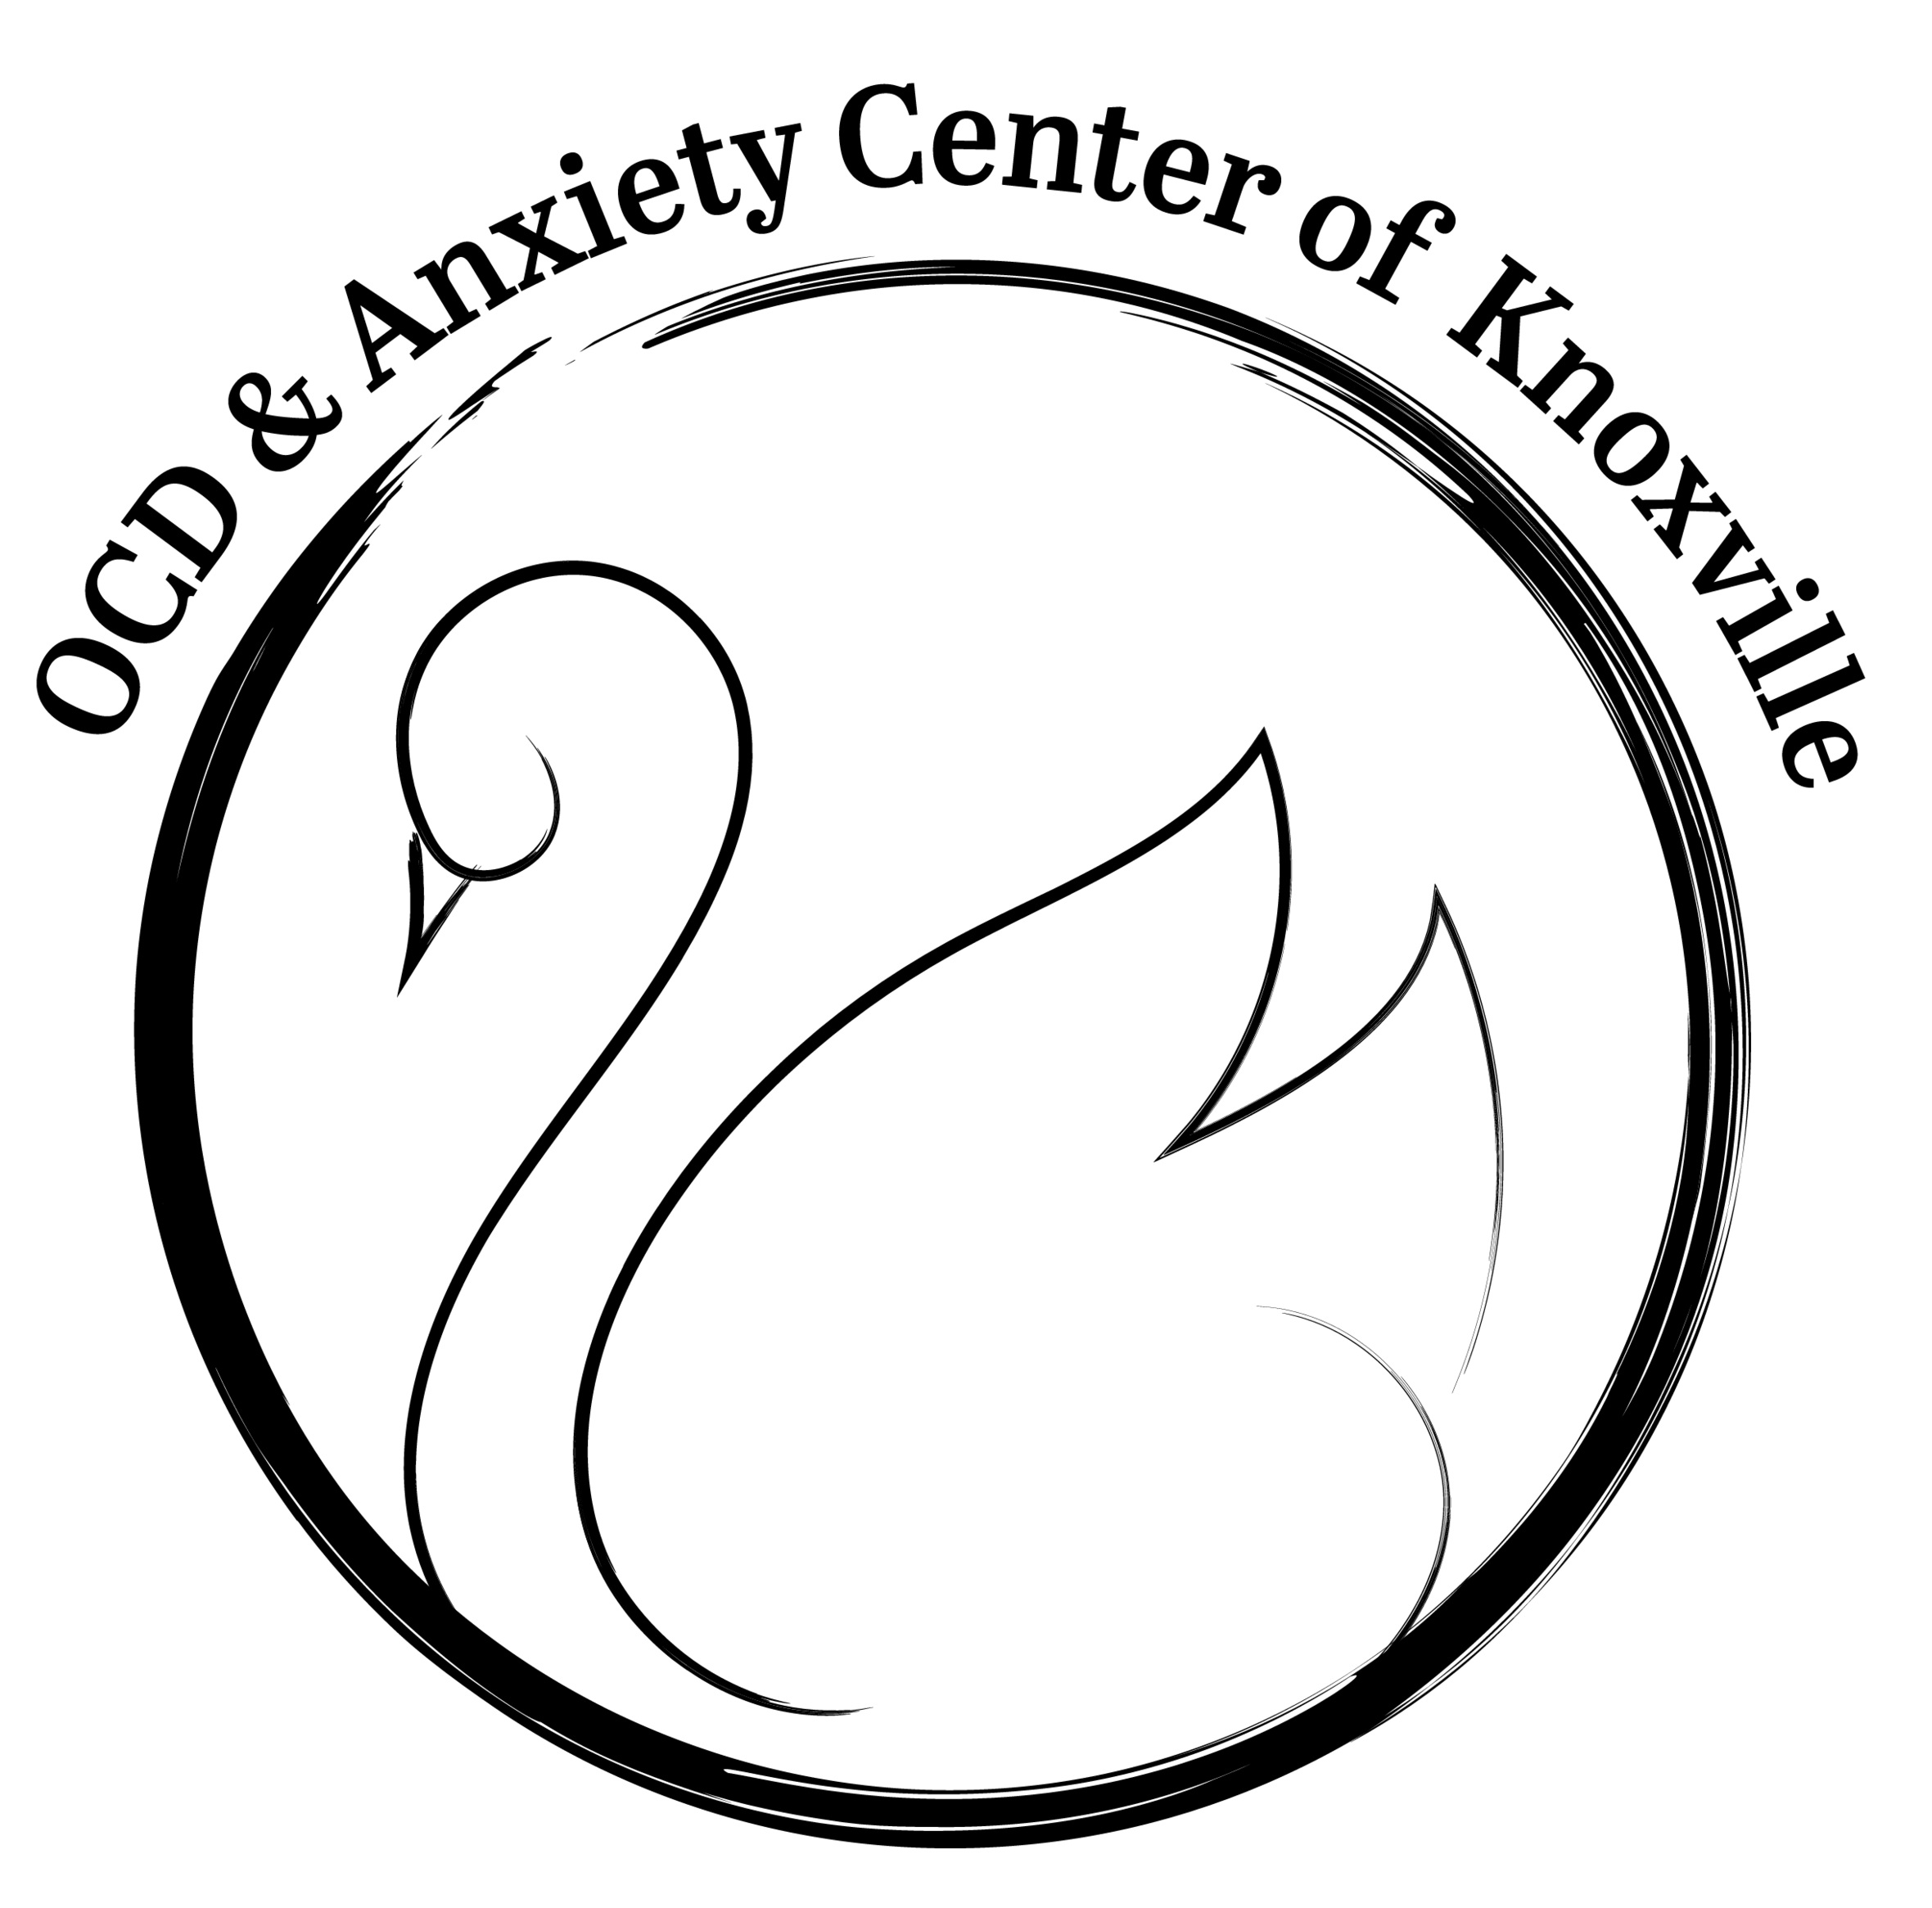 OCD &amp; Anxiety Center of Knoxville